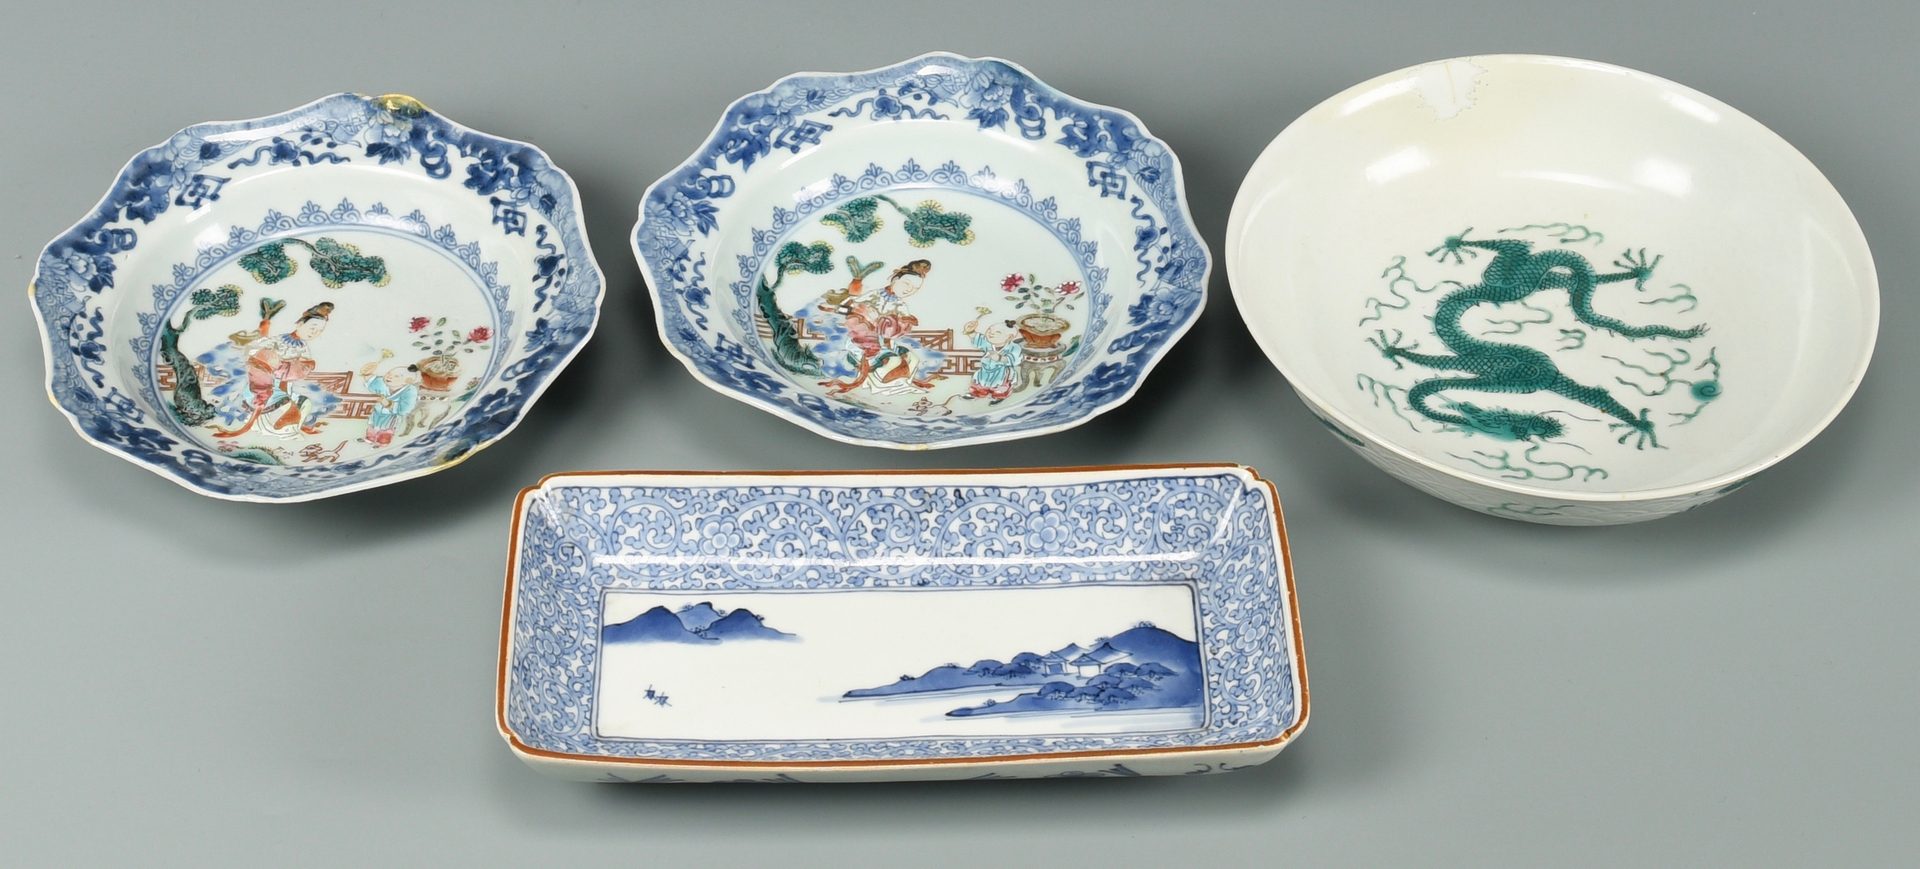 Lot 339: 11 Assorted Chinese Porcelain Items